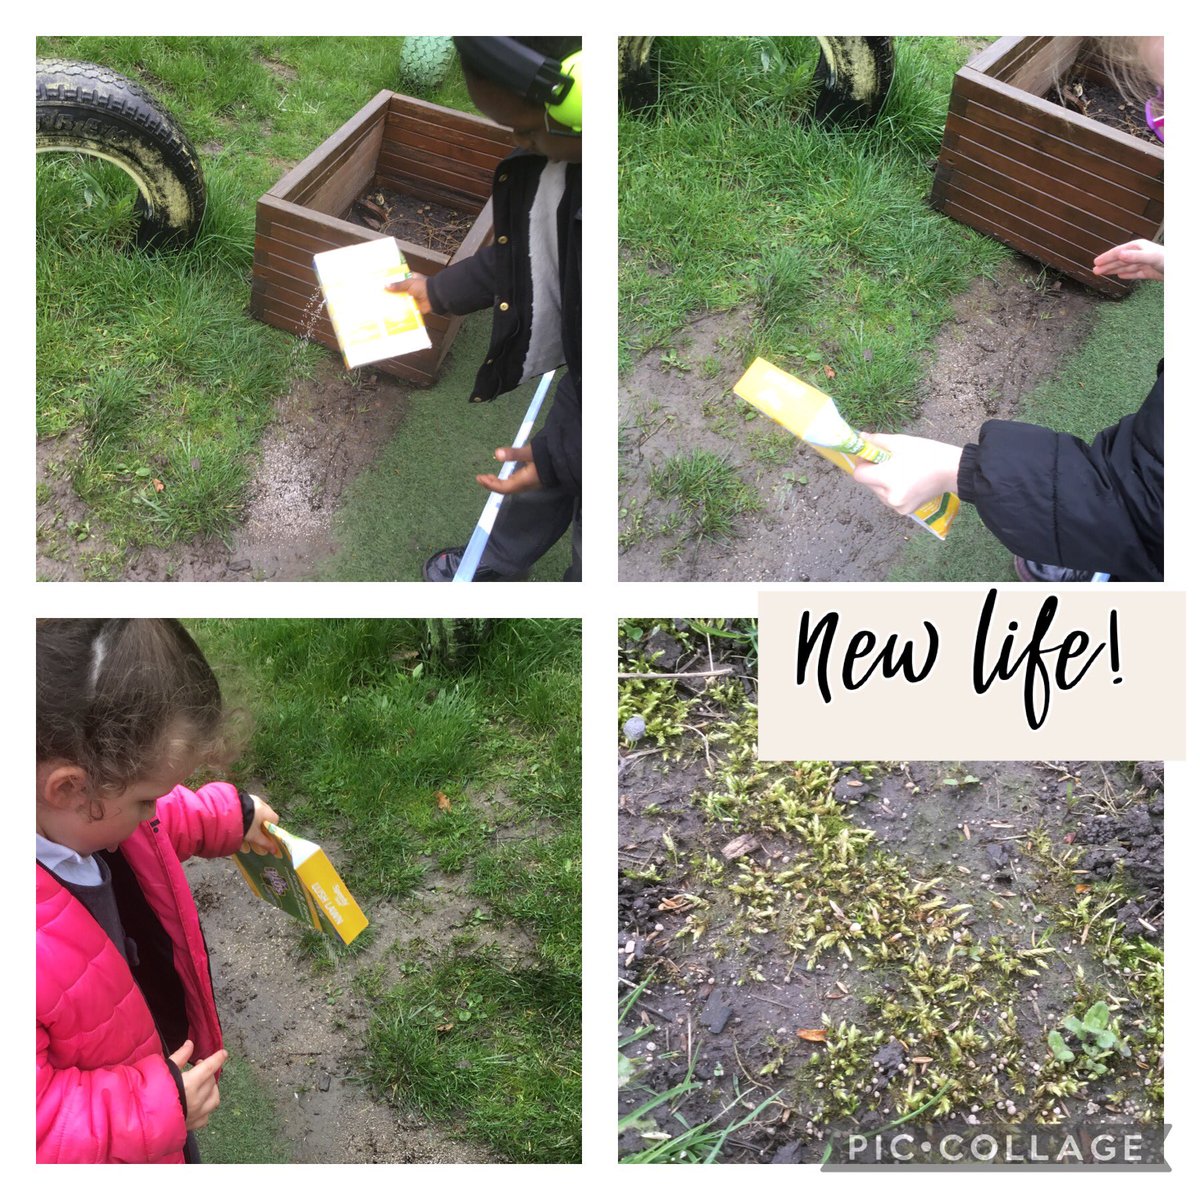 Joy Class have been helping to rejuvenate our outdoor area by planting more grass seeds. In only a few days, we began to see the new grass growing! We also planted some wild flower seeds, to help encourage insects to enjoy God’s wonderful world. @The_RHS @StGtG_CAT @TenTen_UK